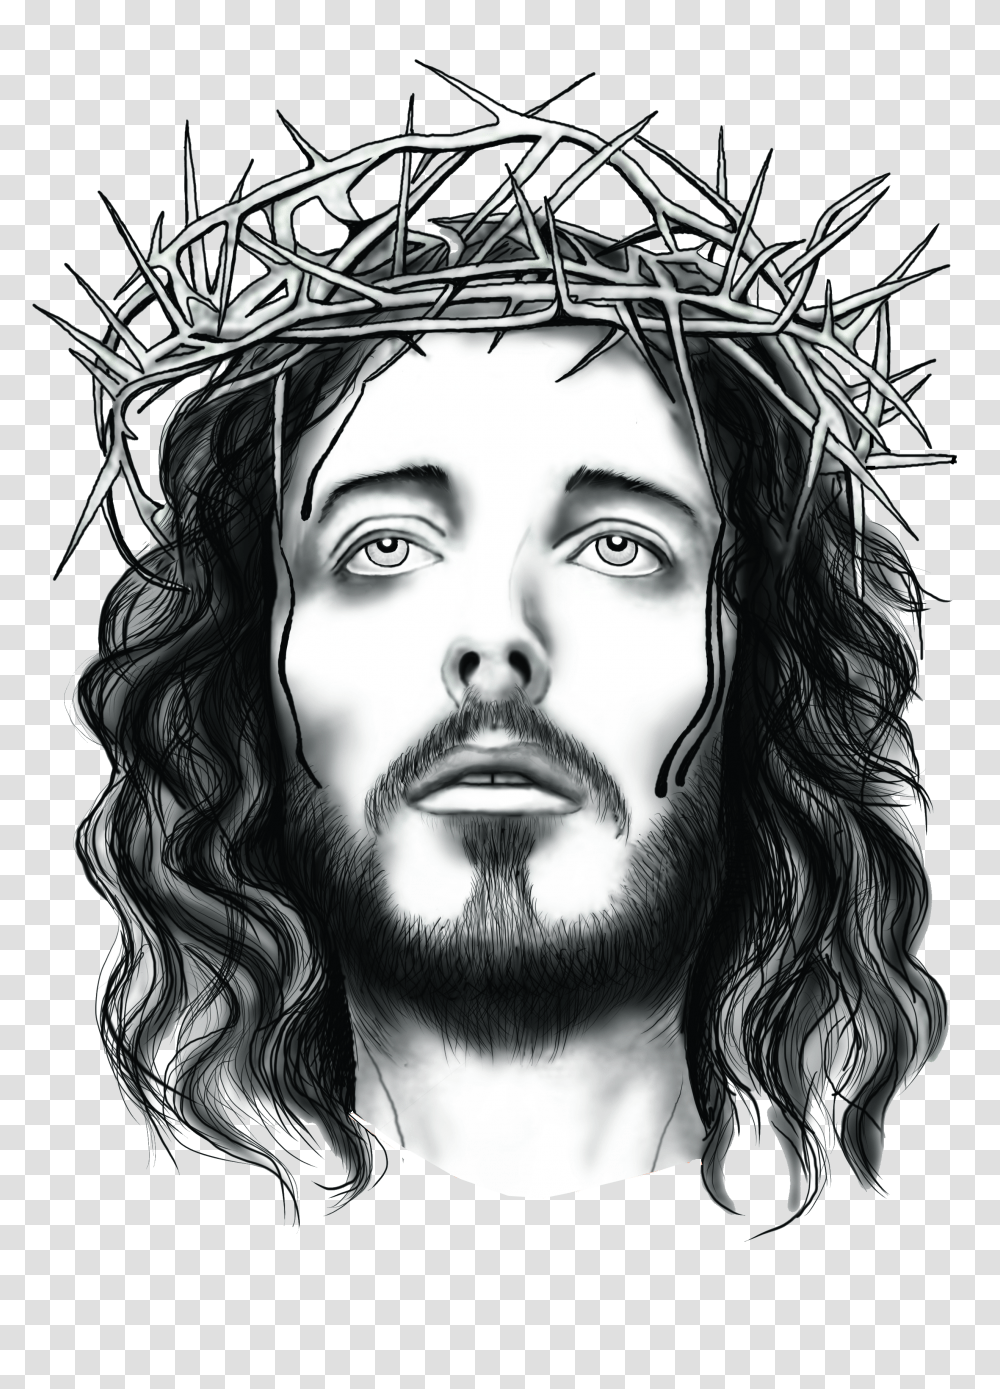 Download Free Jesus With Crown Of Thorns Dlpngcom Transparent Png